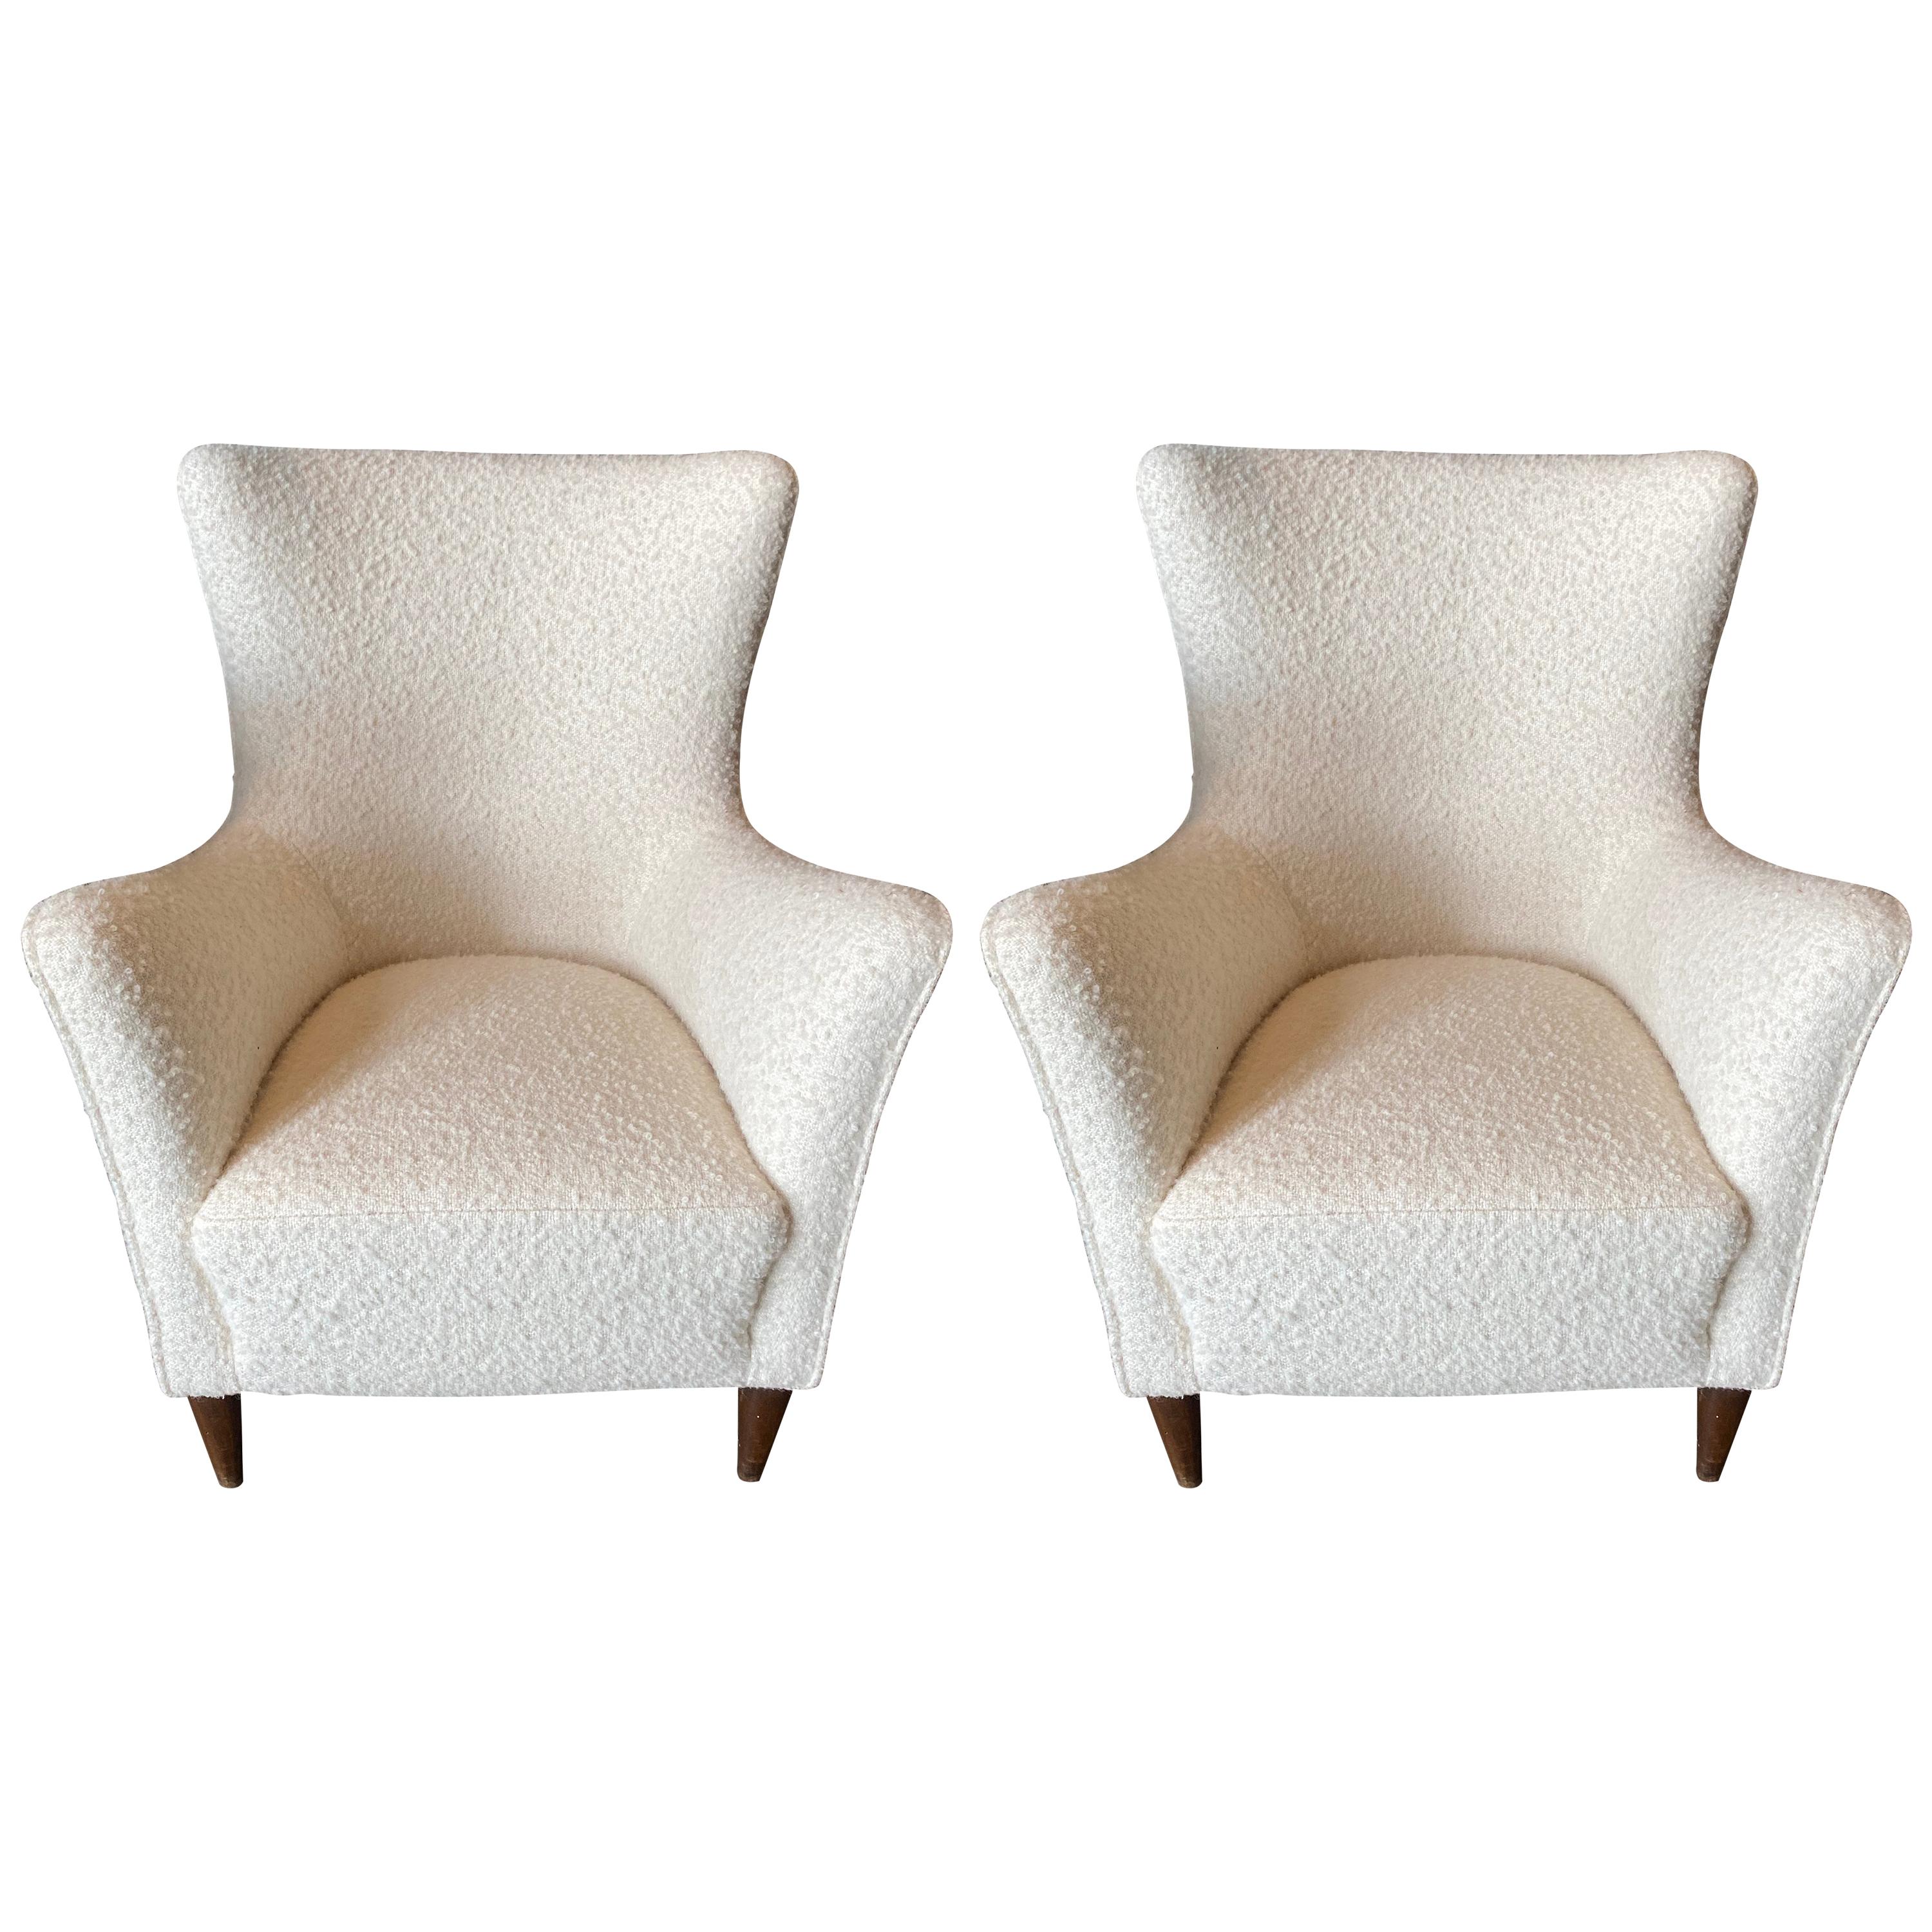 Pair of Italian Mid-Century Wingback Chairs in Creamy White Boucle For Sale